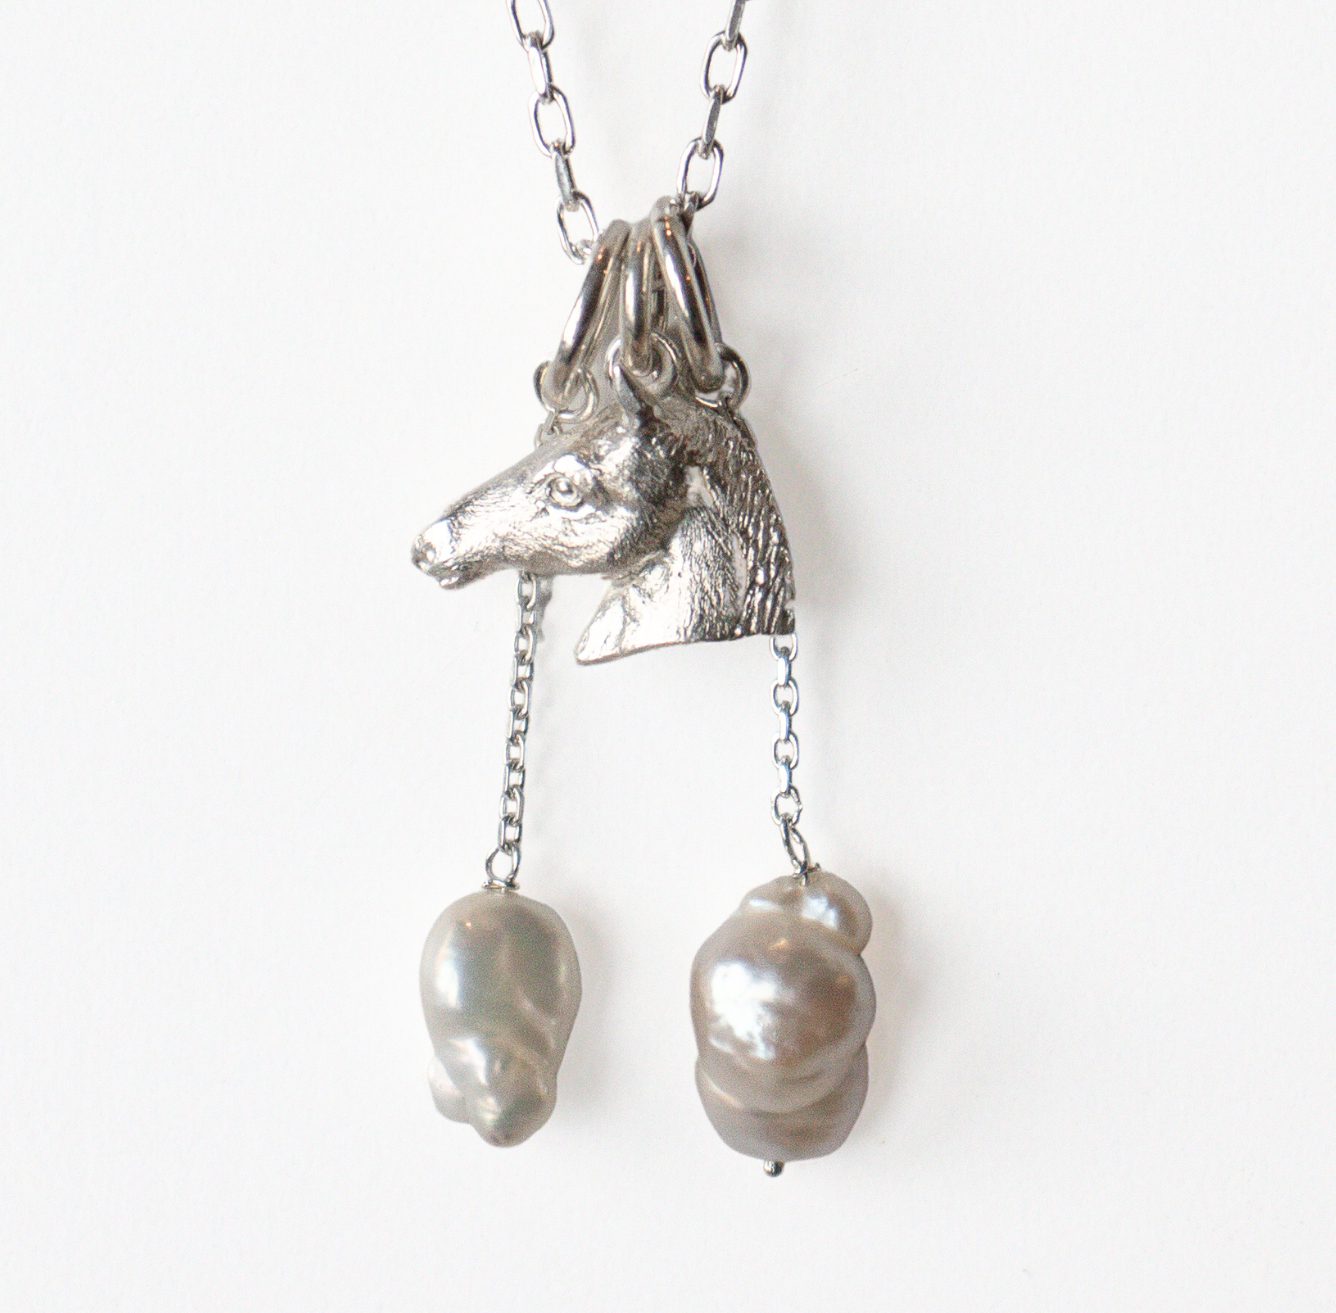 Horse Pendant with Freshwater Pearl Drops by Paul Eaton 